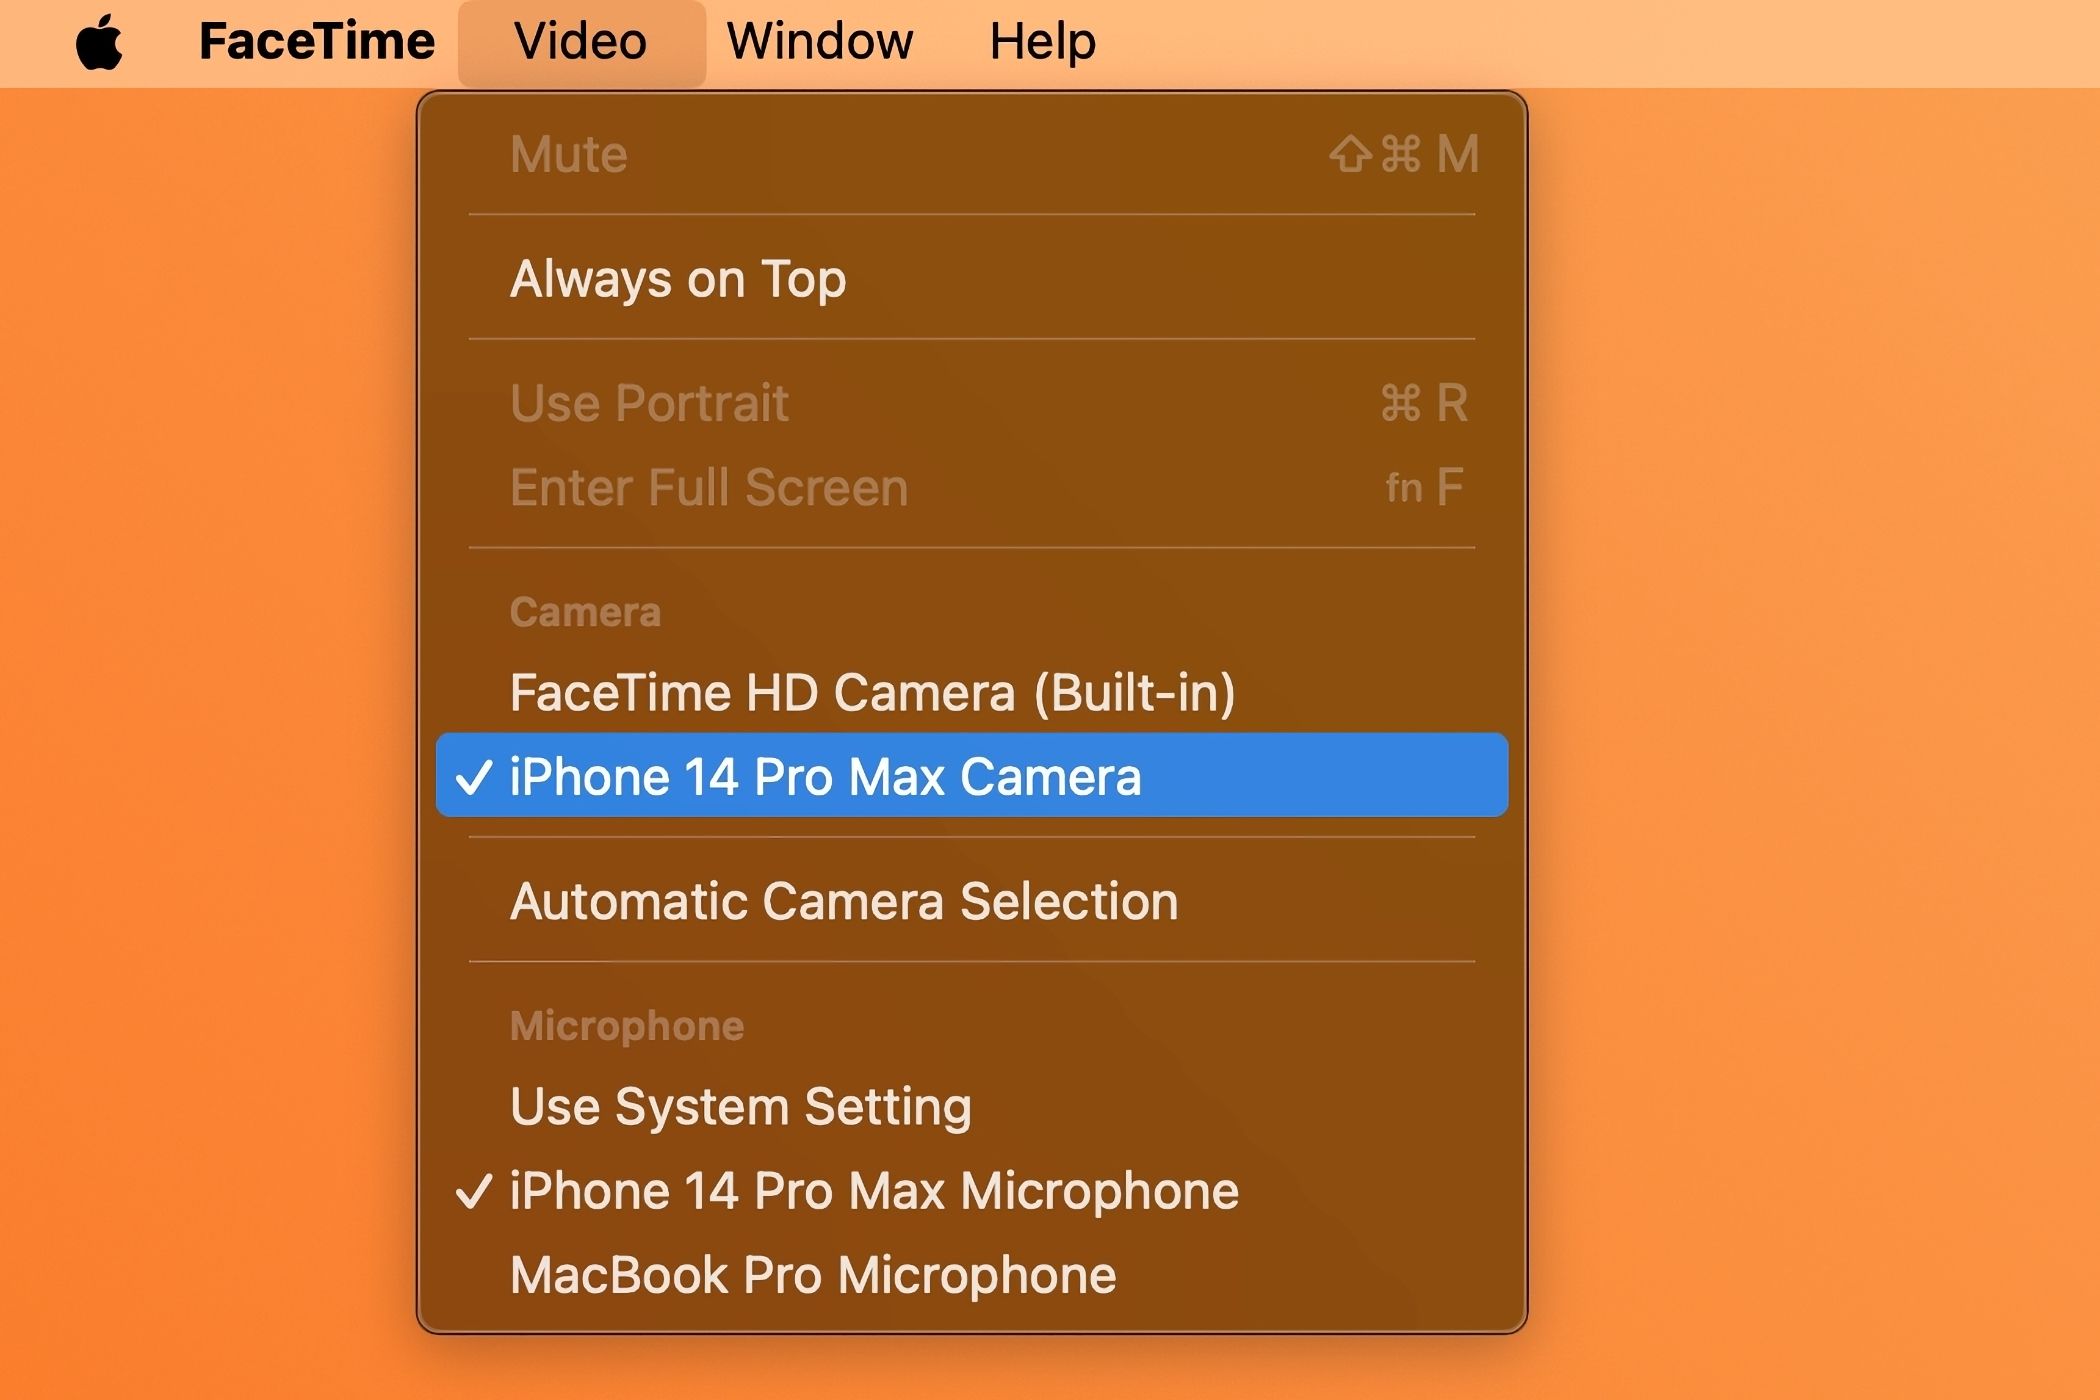 Choosing iPhone Continuity Camera from FaceTime for Mac's Video menu.